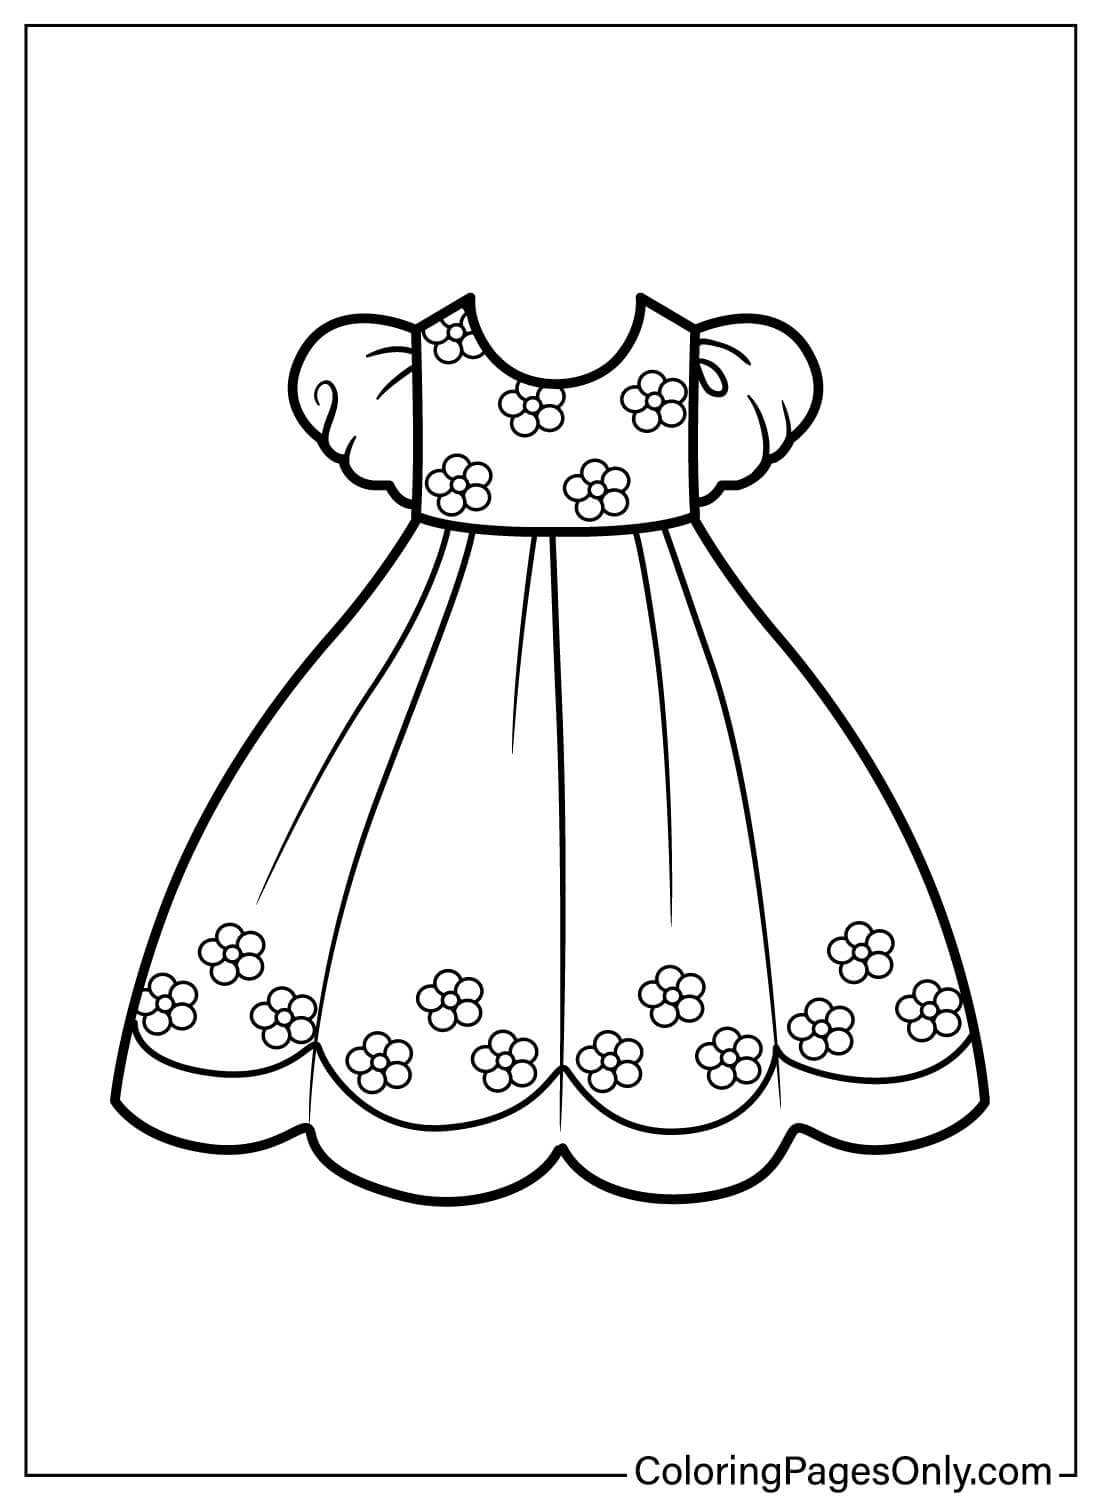 Baby Dress Color Page - Free Printable Coloring Pages